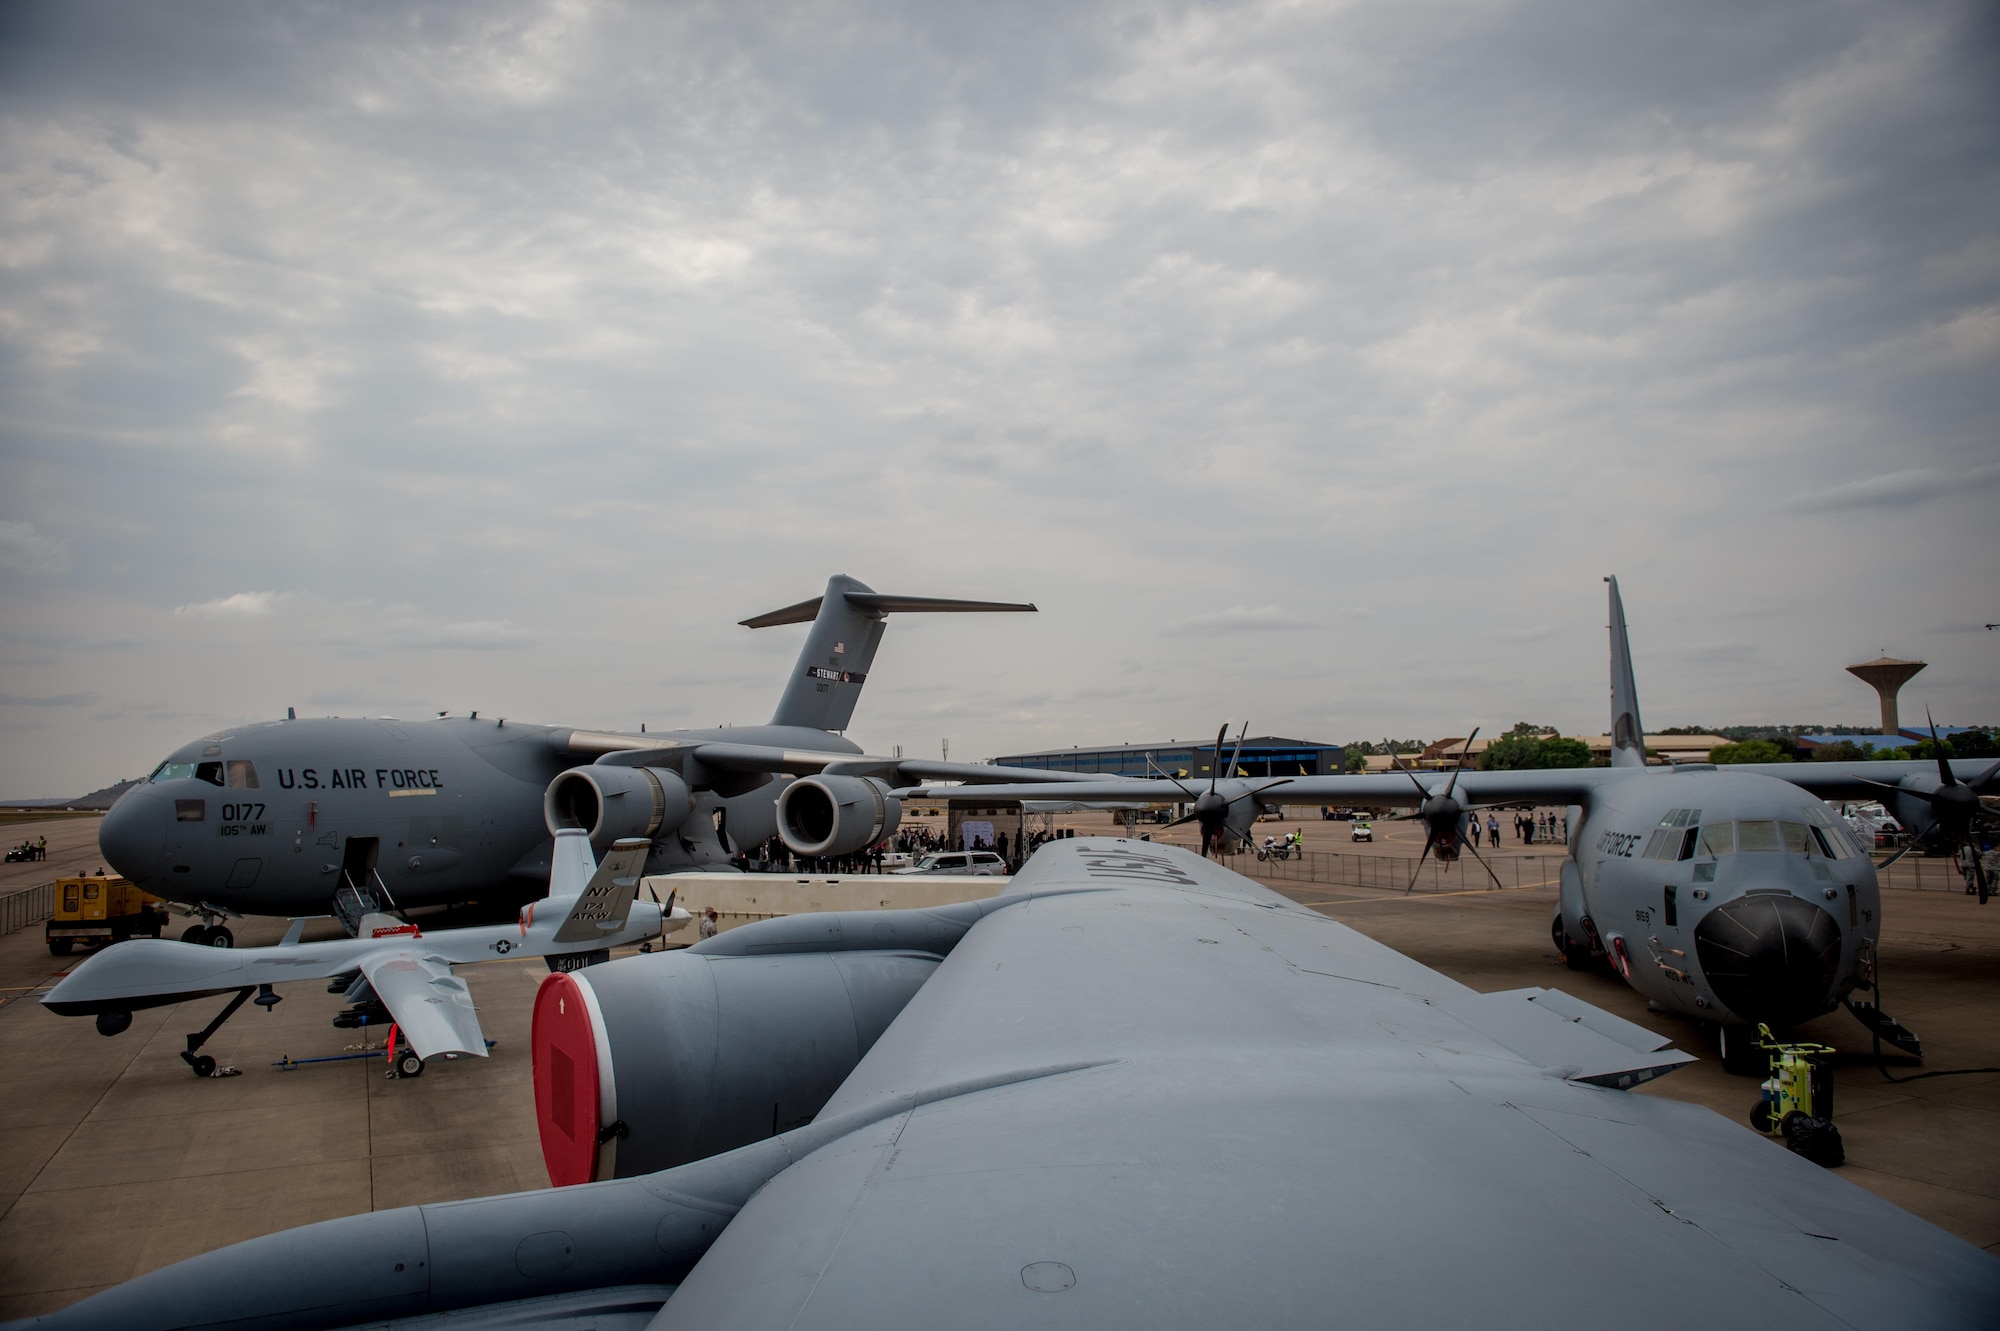 U.S. military aircraft are displayed at the African Aerospace and Defense Expo at Waterkloof Air Force Base, South Africa, Sept. 14, 2016. The U.S. military is exhibiting a C-17 Globemaster III, a KC-135 Stratotanker, a C-130J Super Hercules, an HC-130 King, and an MQ-9 Reaper. The aircraft come from various Air National Guard and Air Force Reserve Command units. The U.S. routinely participates in events like AADE to strengthen partnerships with regional partners. (U.S. Air Force photo by Tech. Sgt. Ryan Crane)